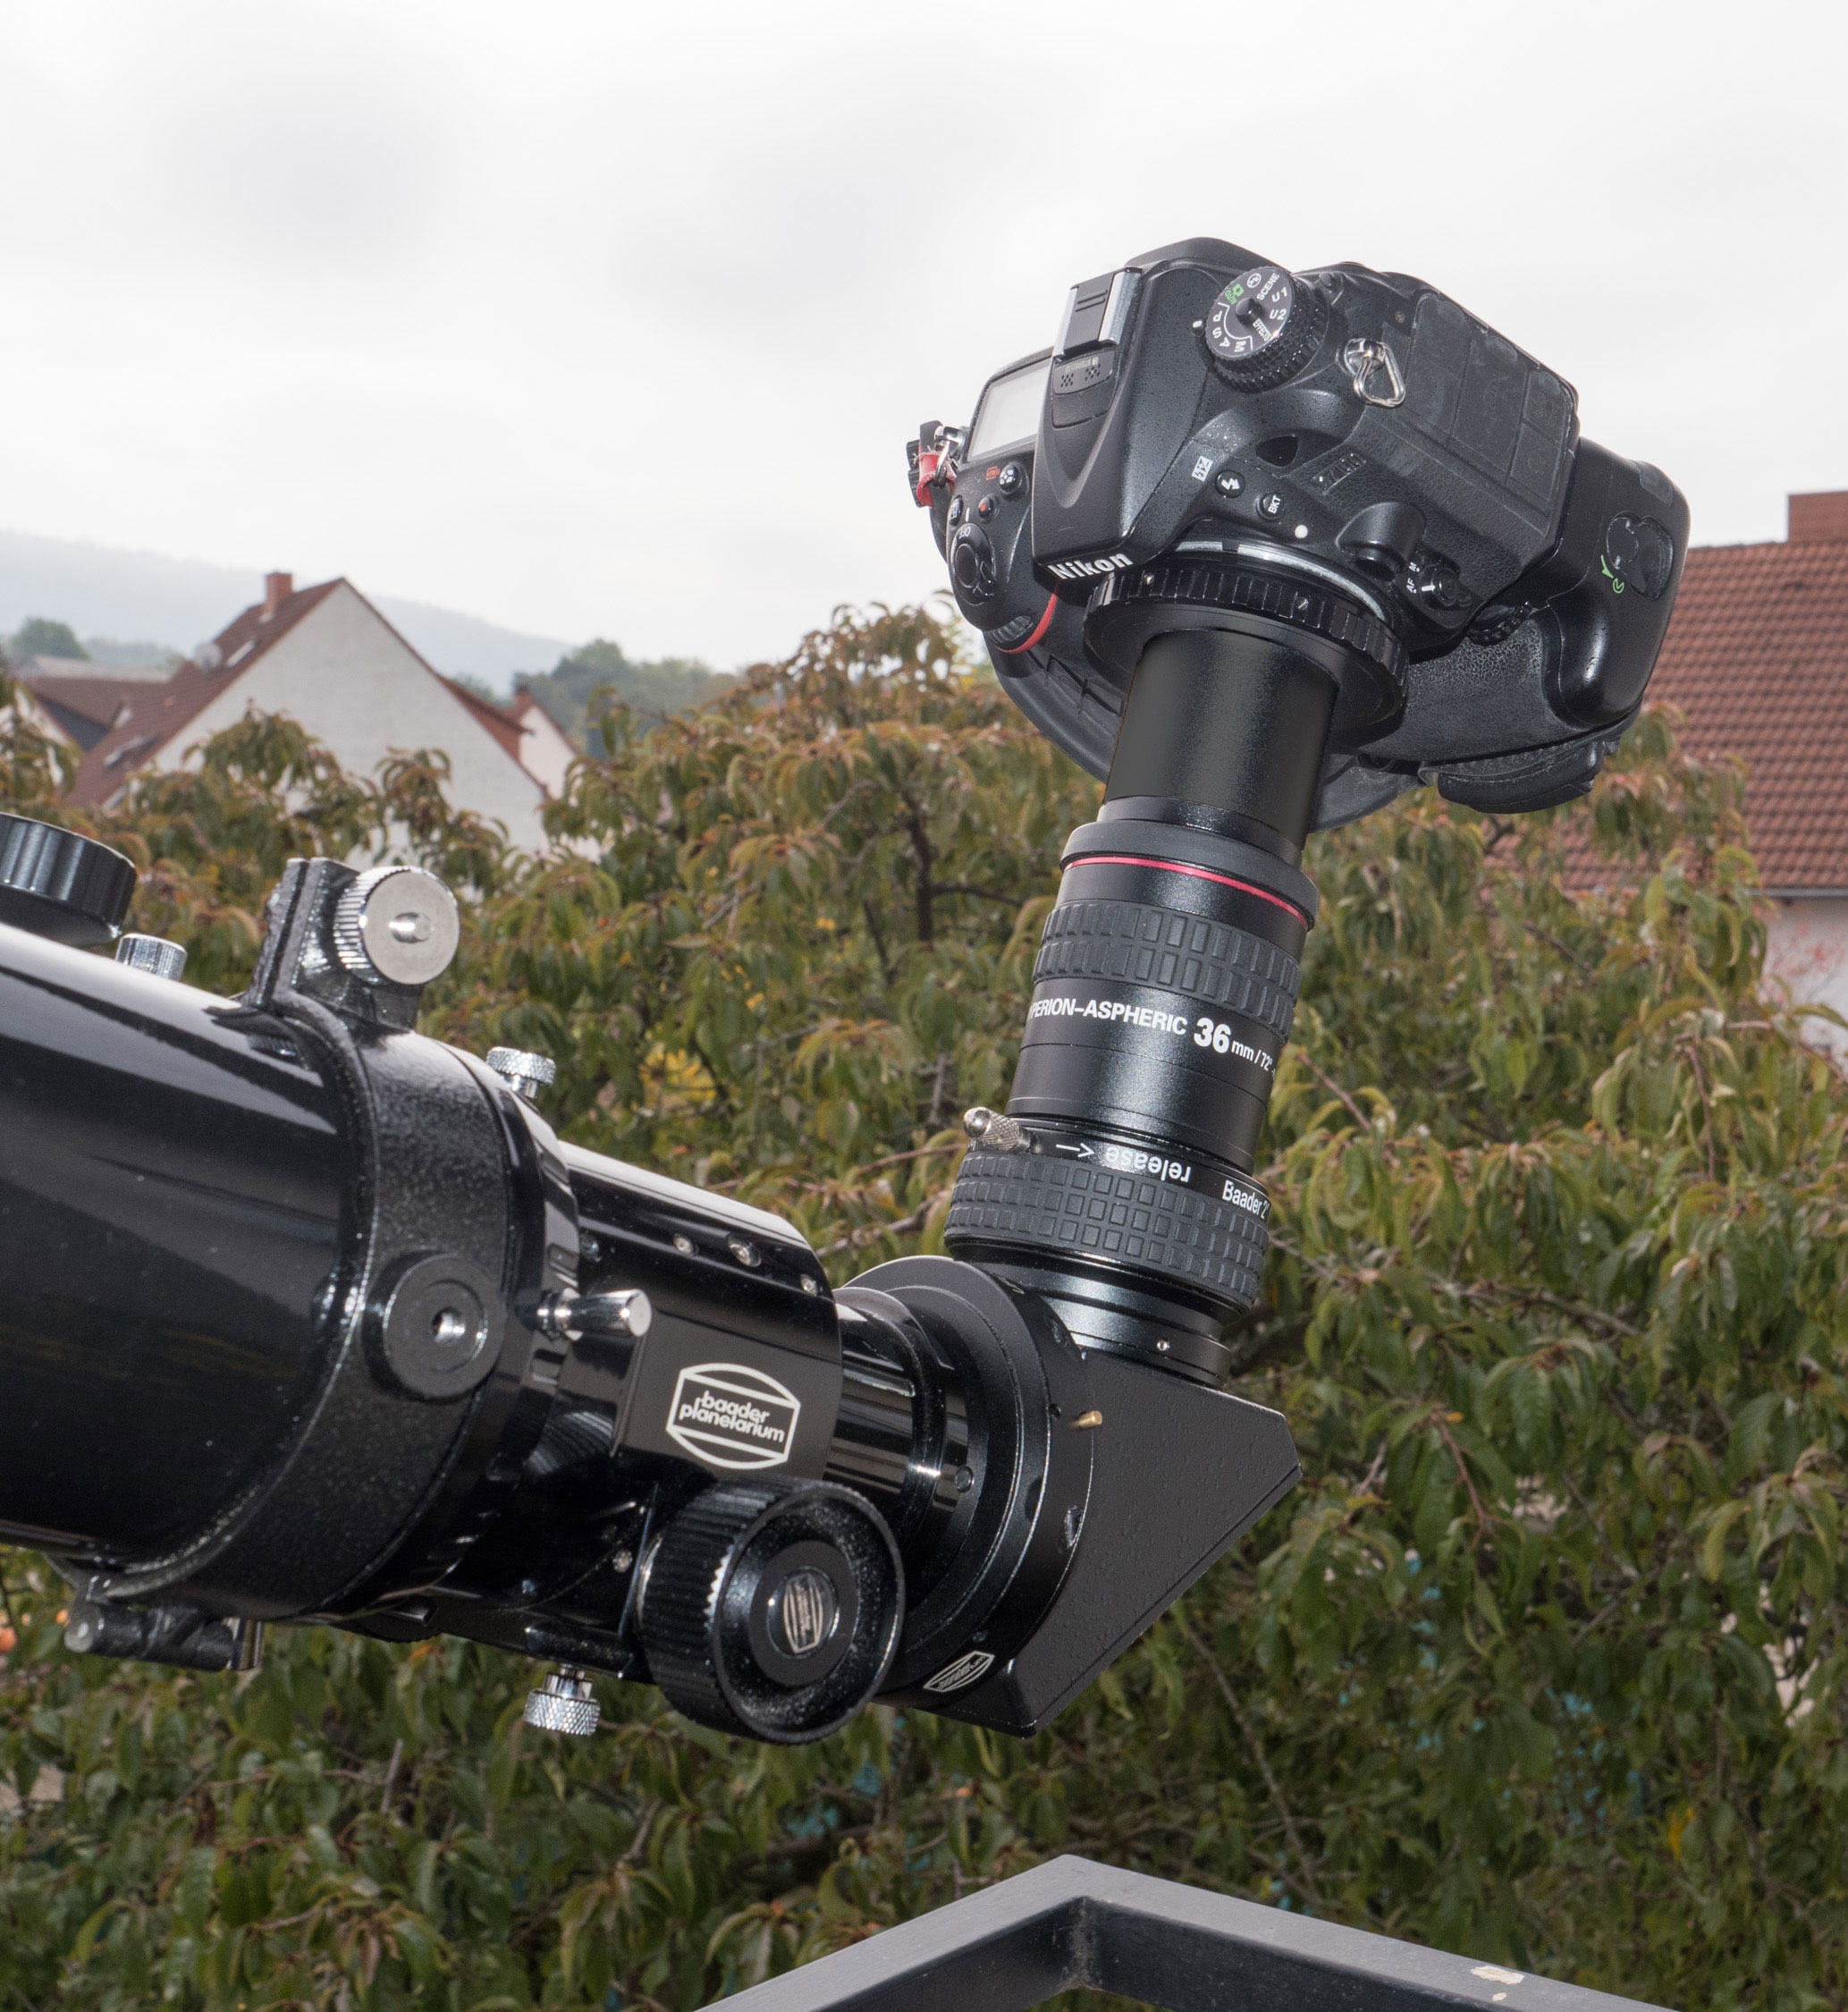 Attaching a Camera to Your Telescope, Part 1 